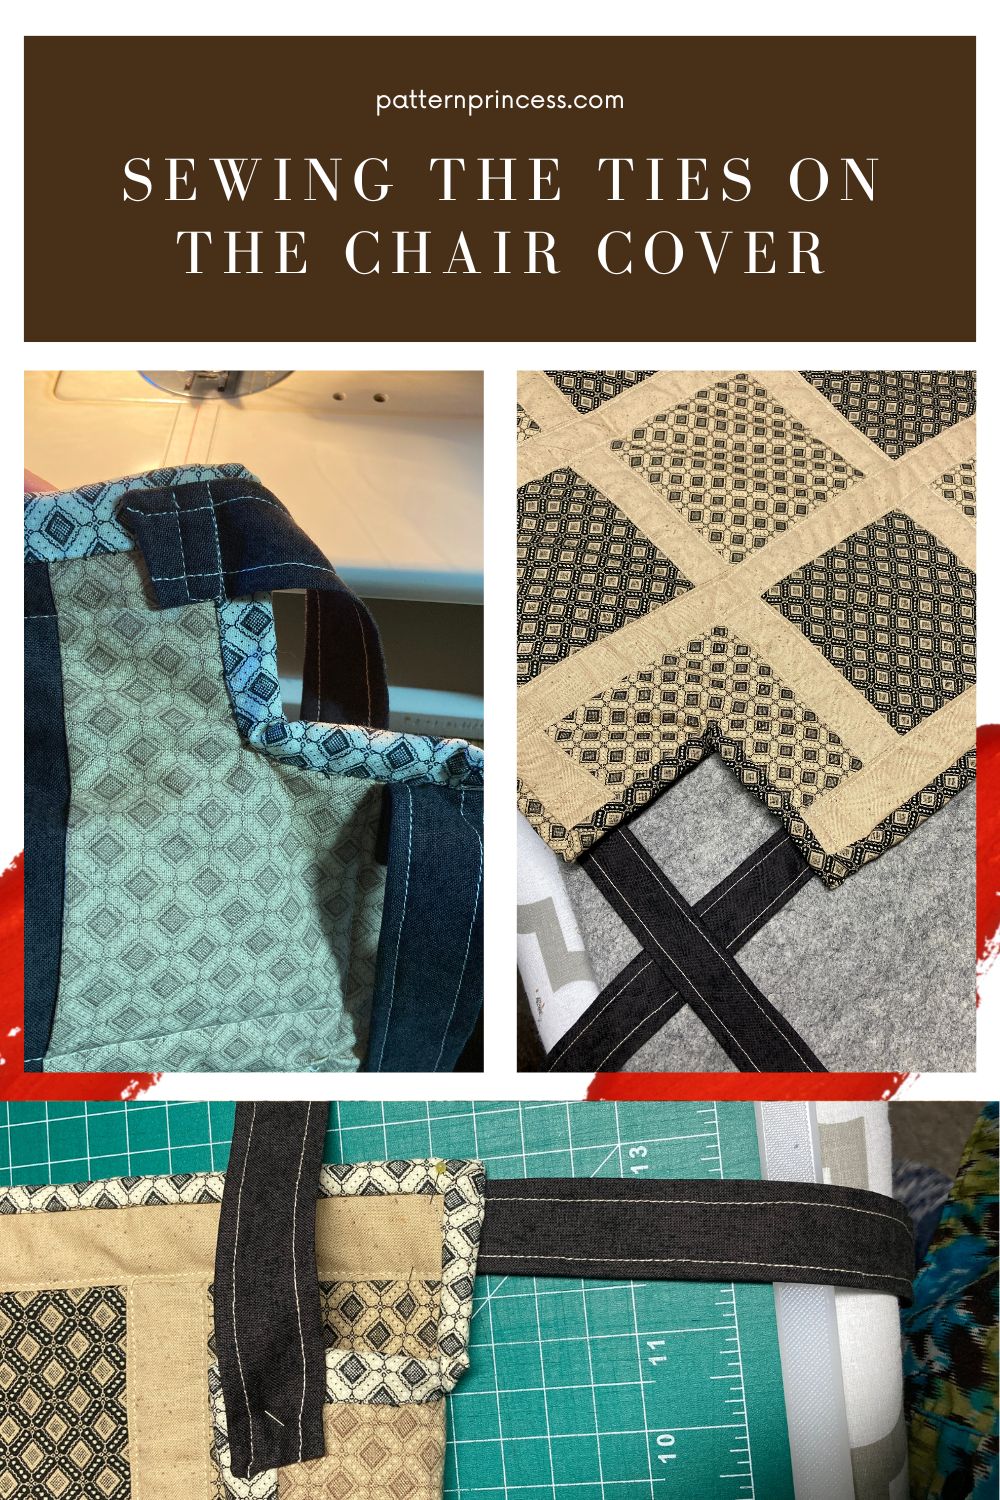 Sewing the Ties on the Chair Cover